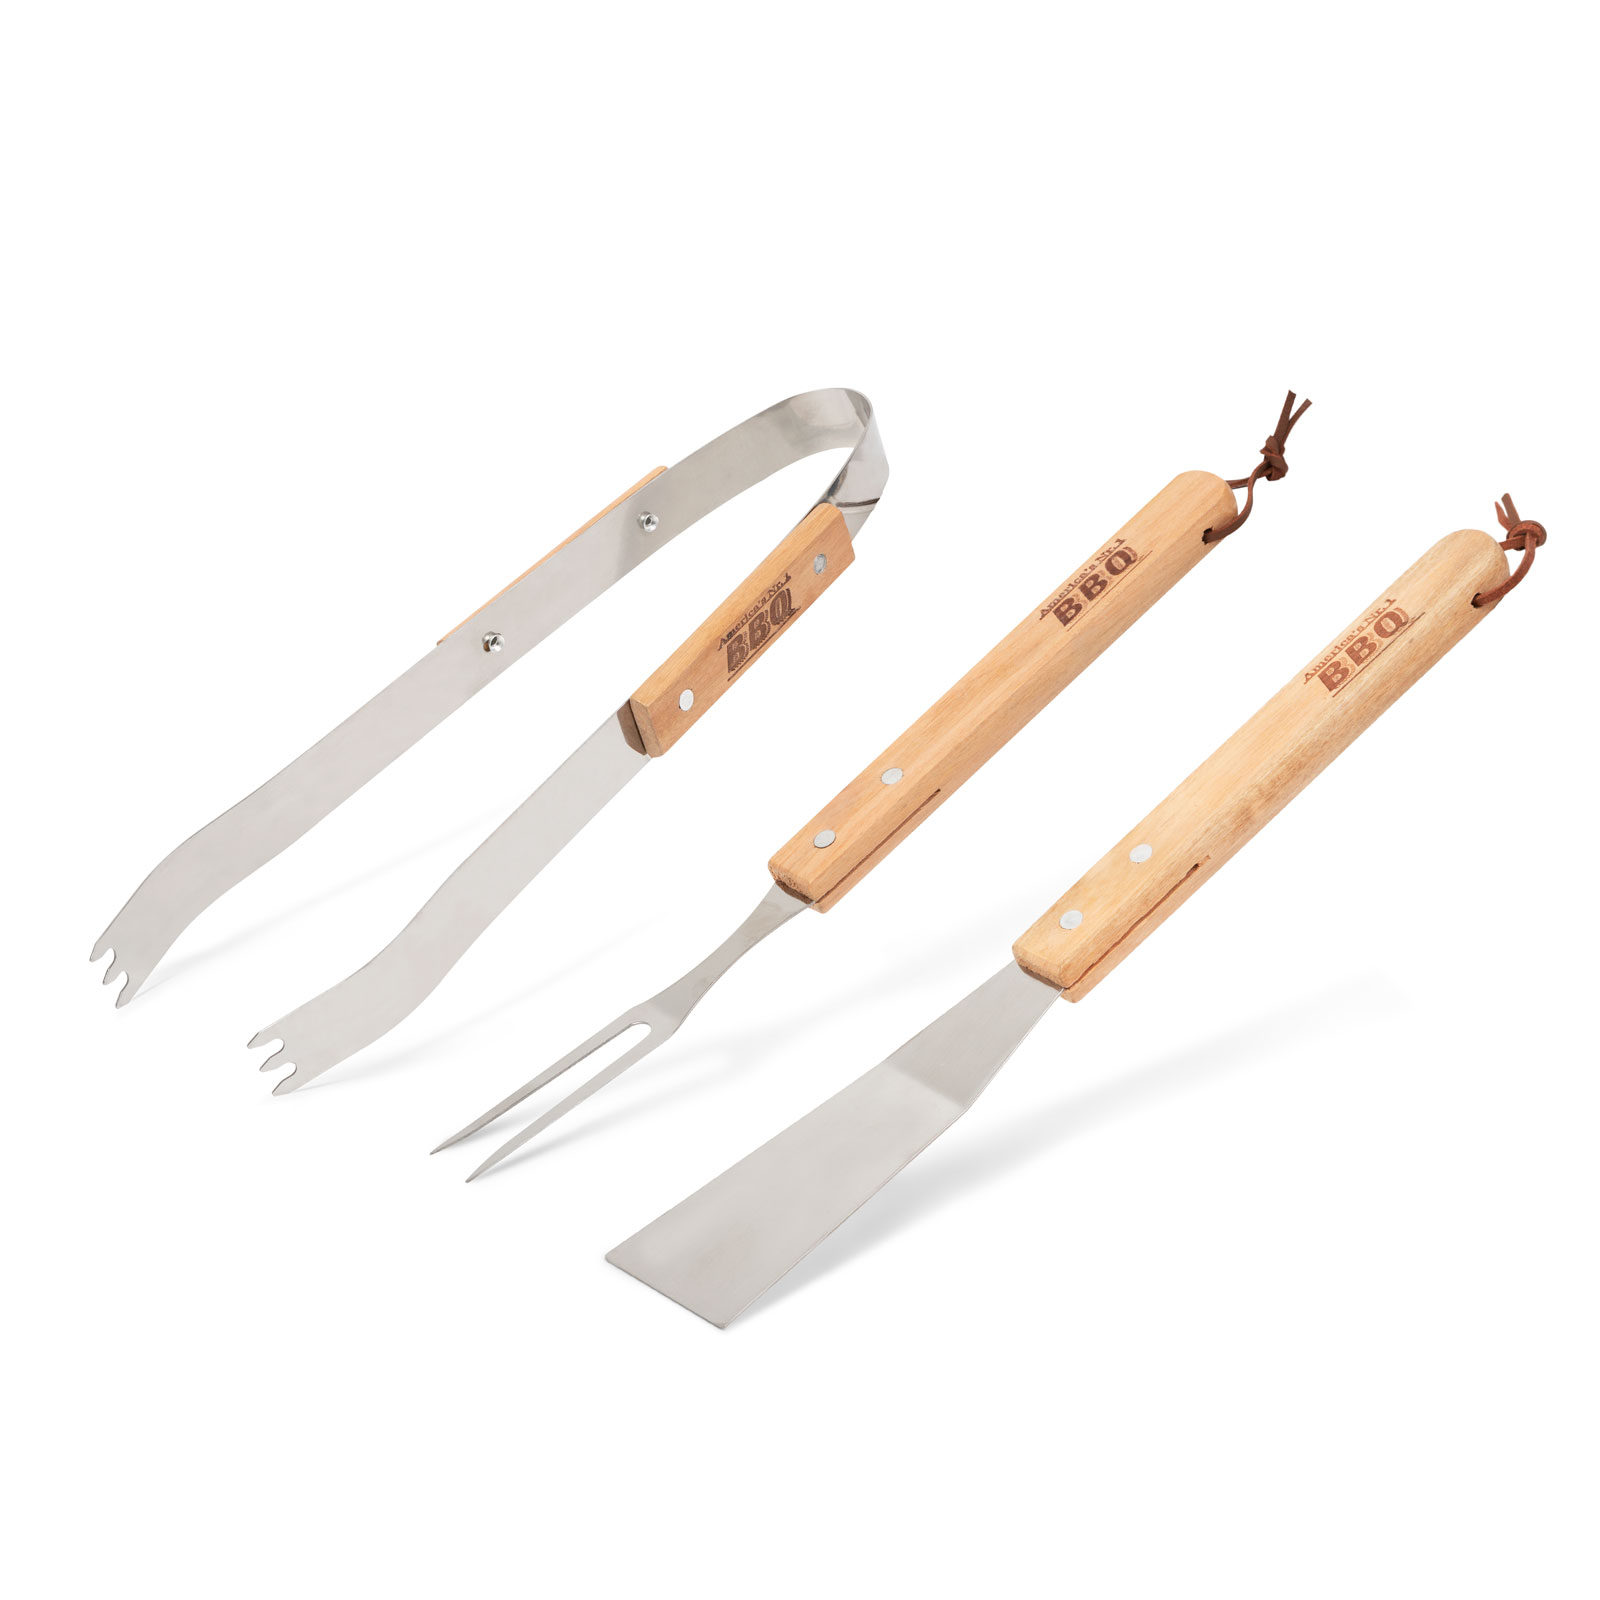 Grill tool kit - 3pcs - with wooden handle thumb